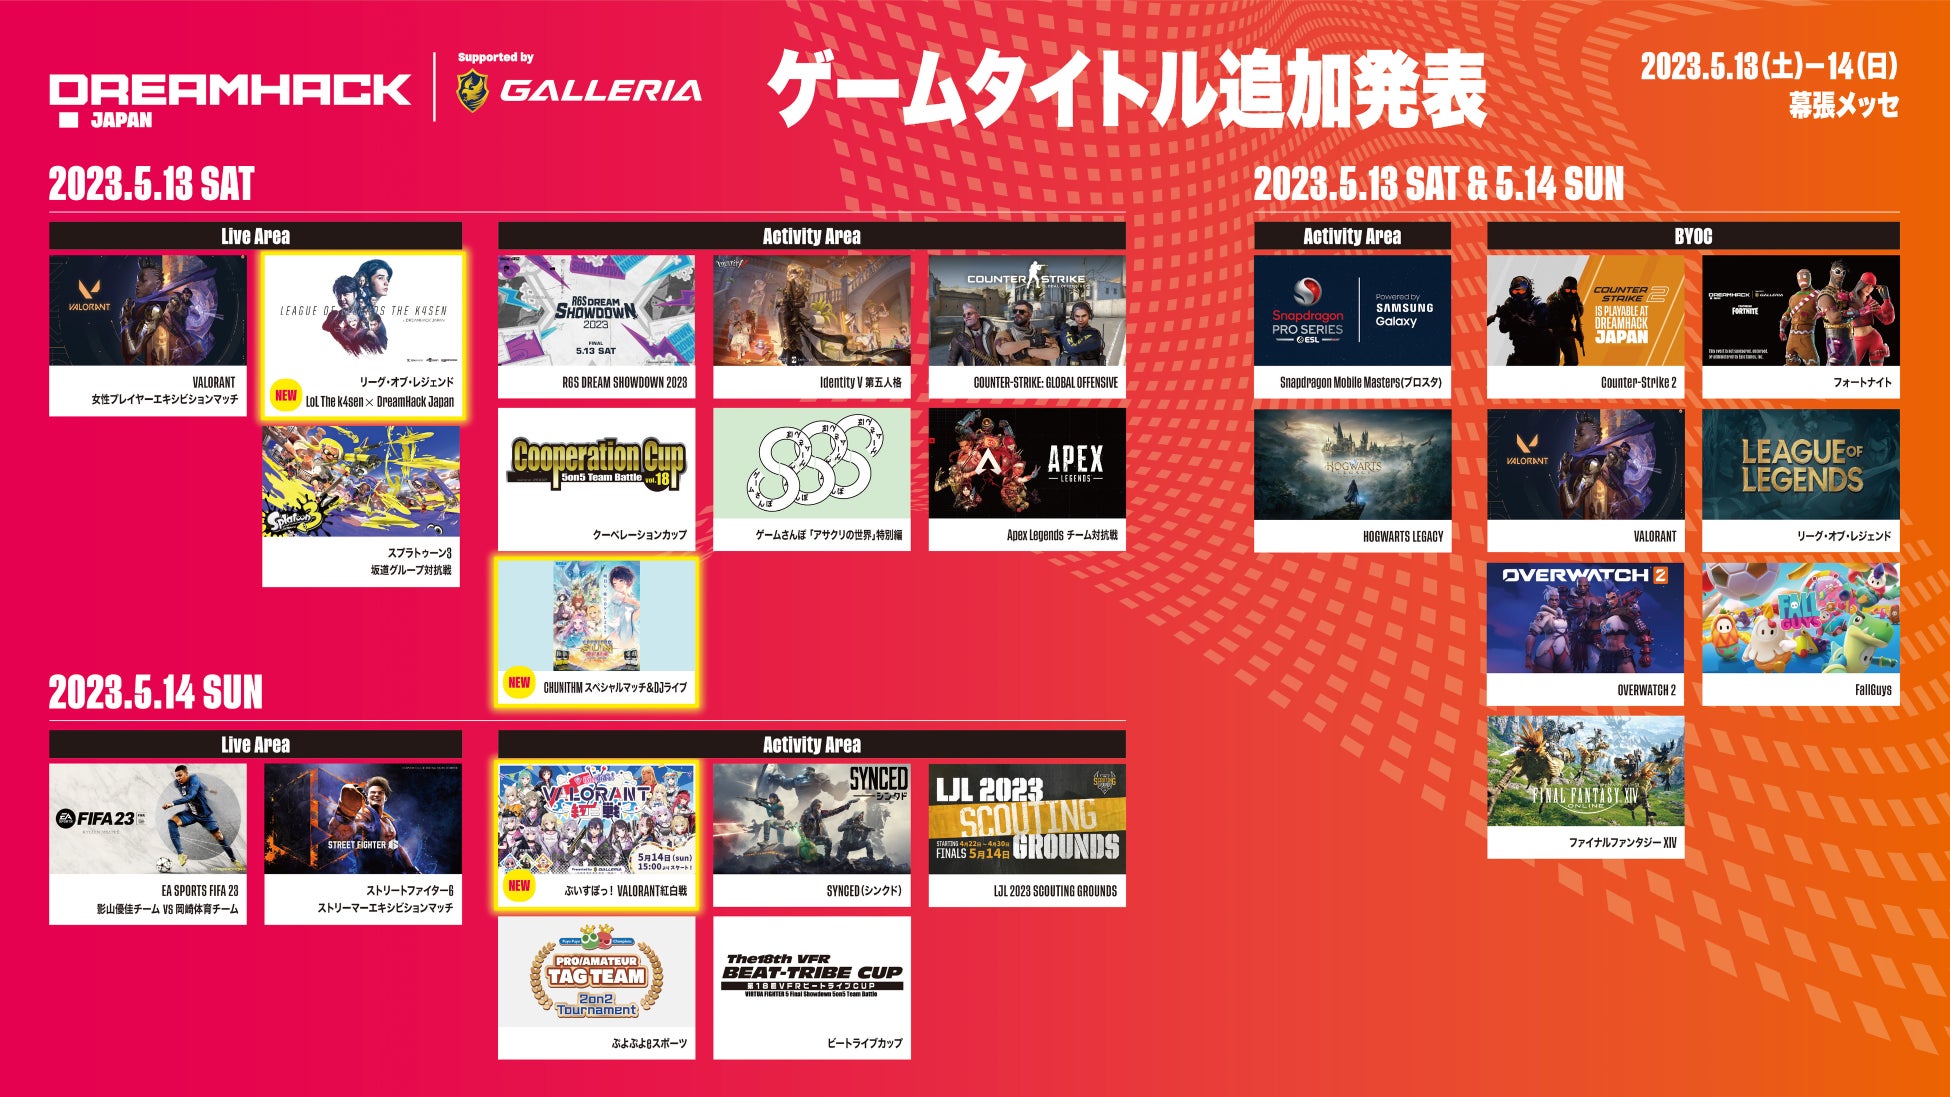 「DreamHack Japan 2023 Supported by GALLERIA」ゲームタイトル  第9弾追加発表！